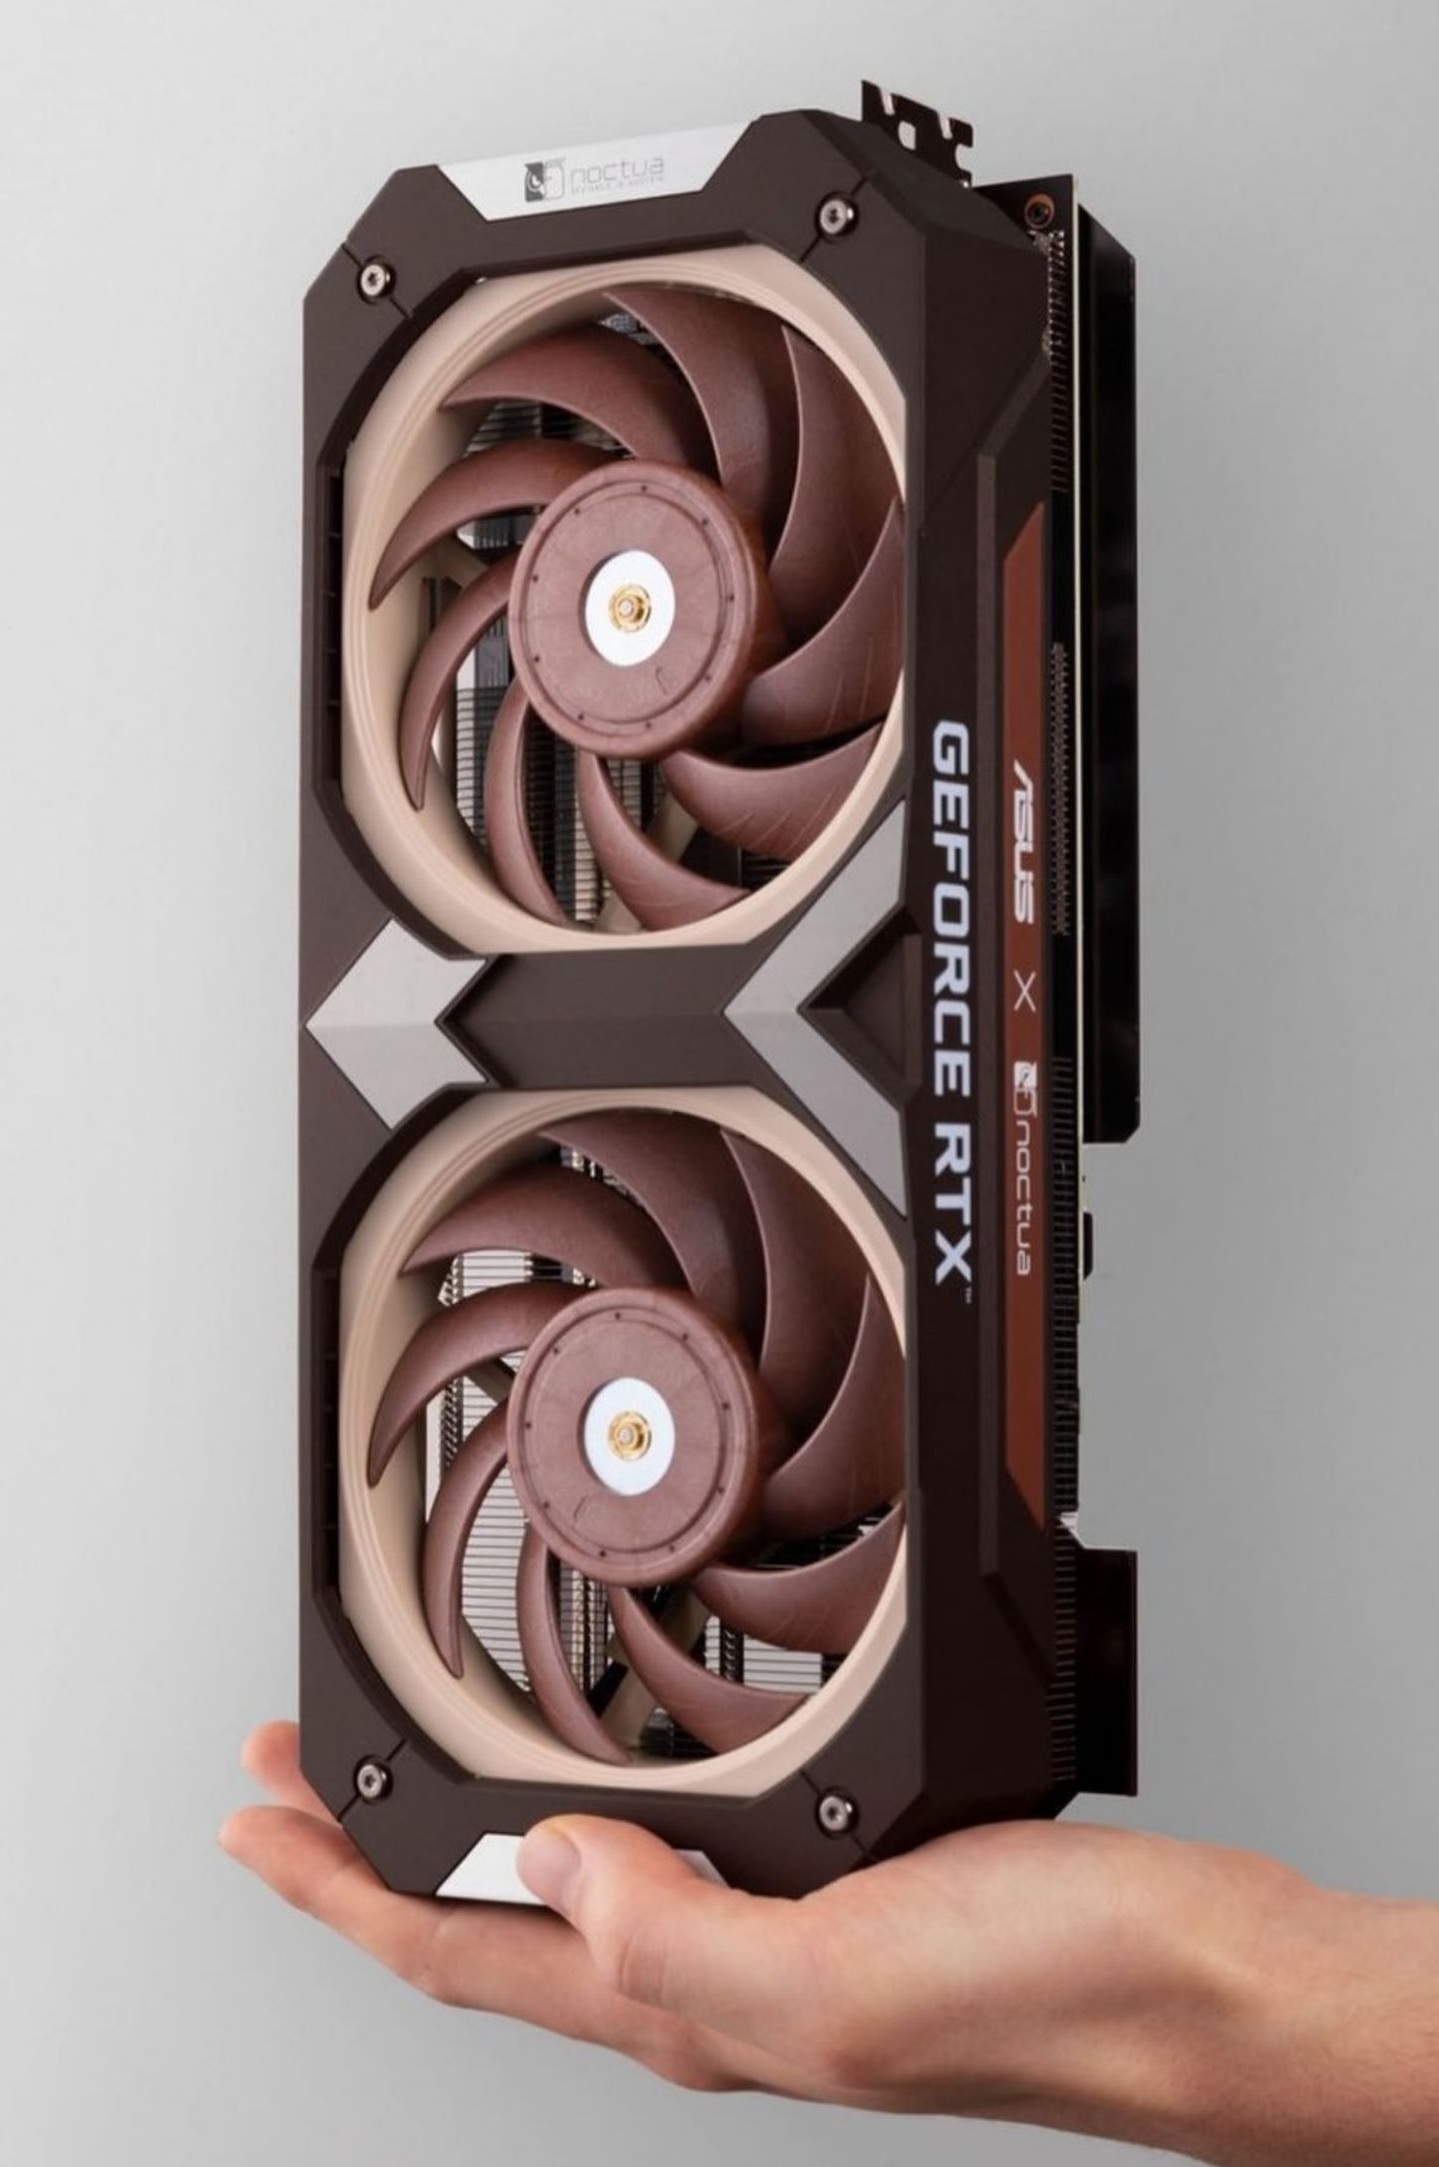 The ASUS GeForce RTX 4080 Noctua Edition brings the best in quiet